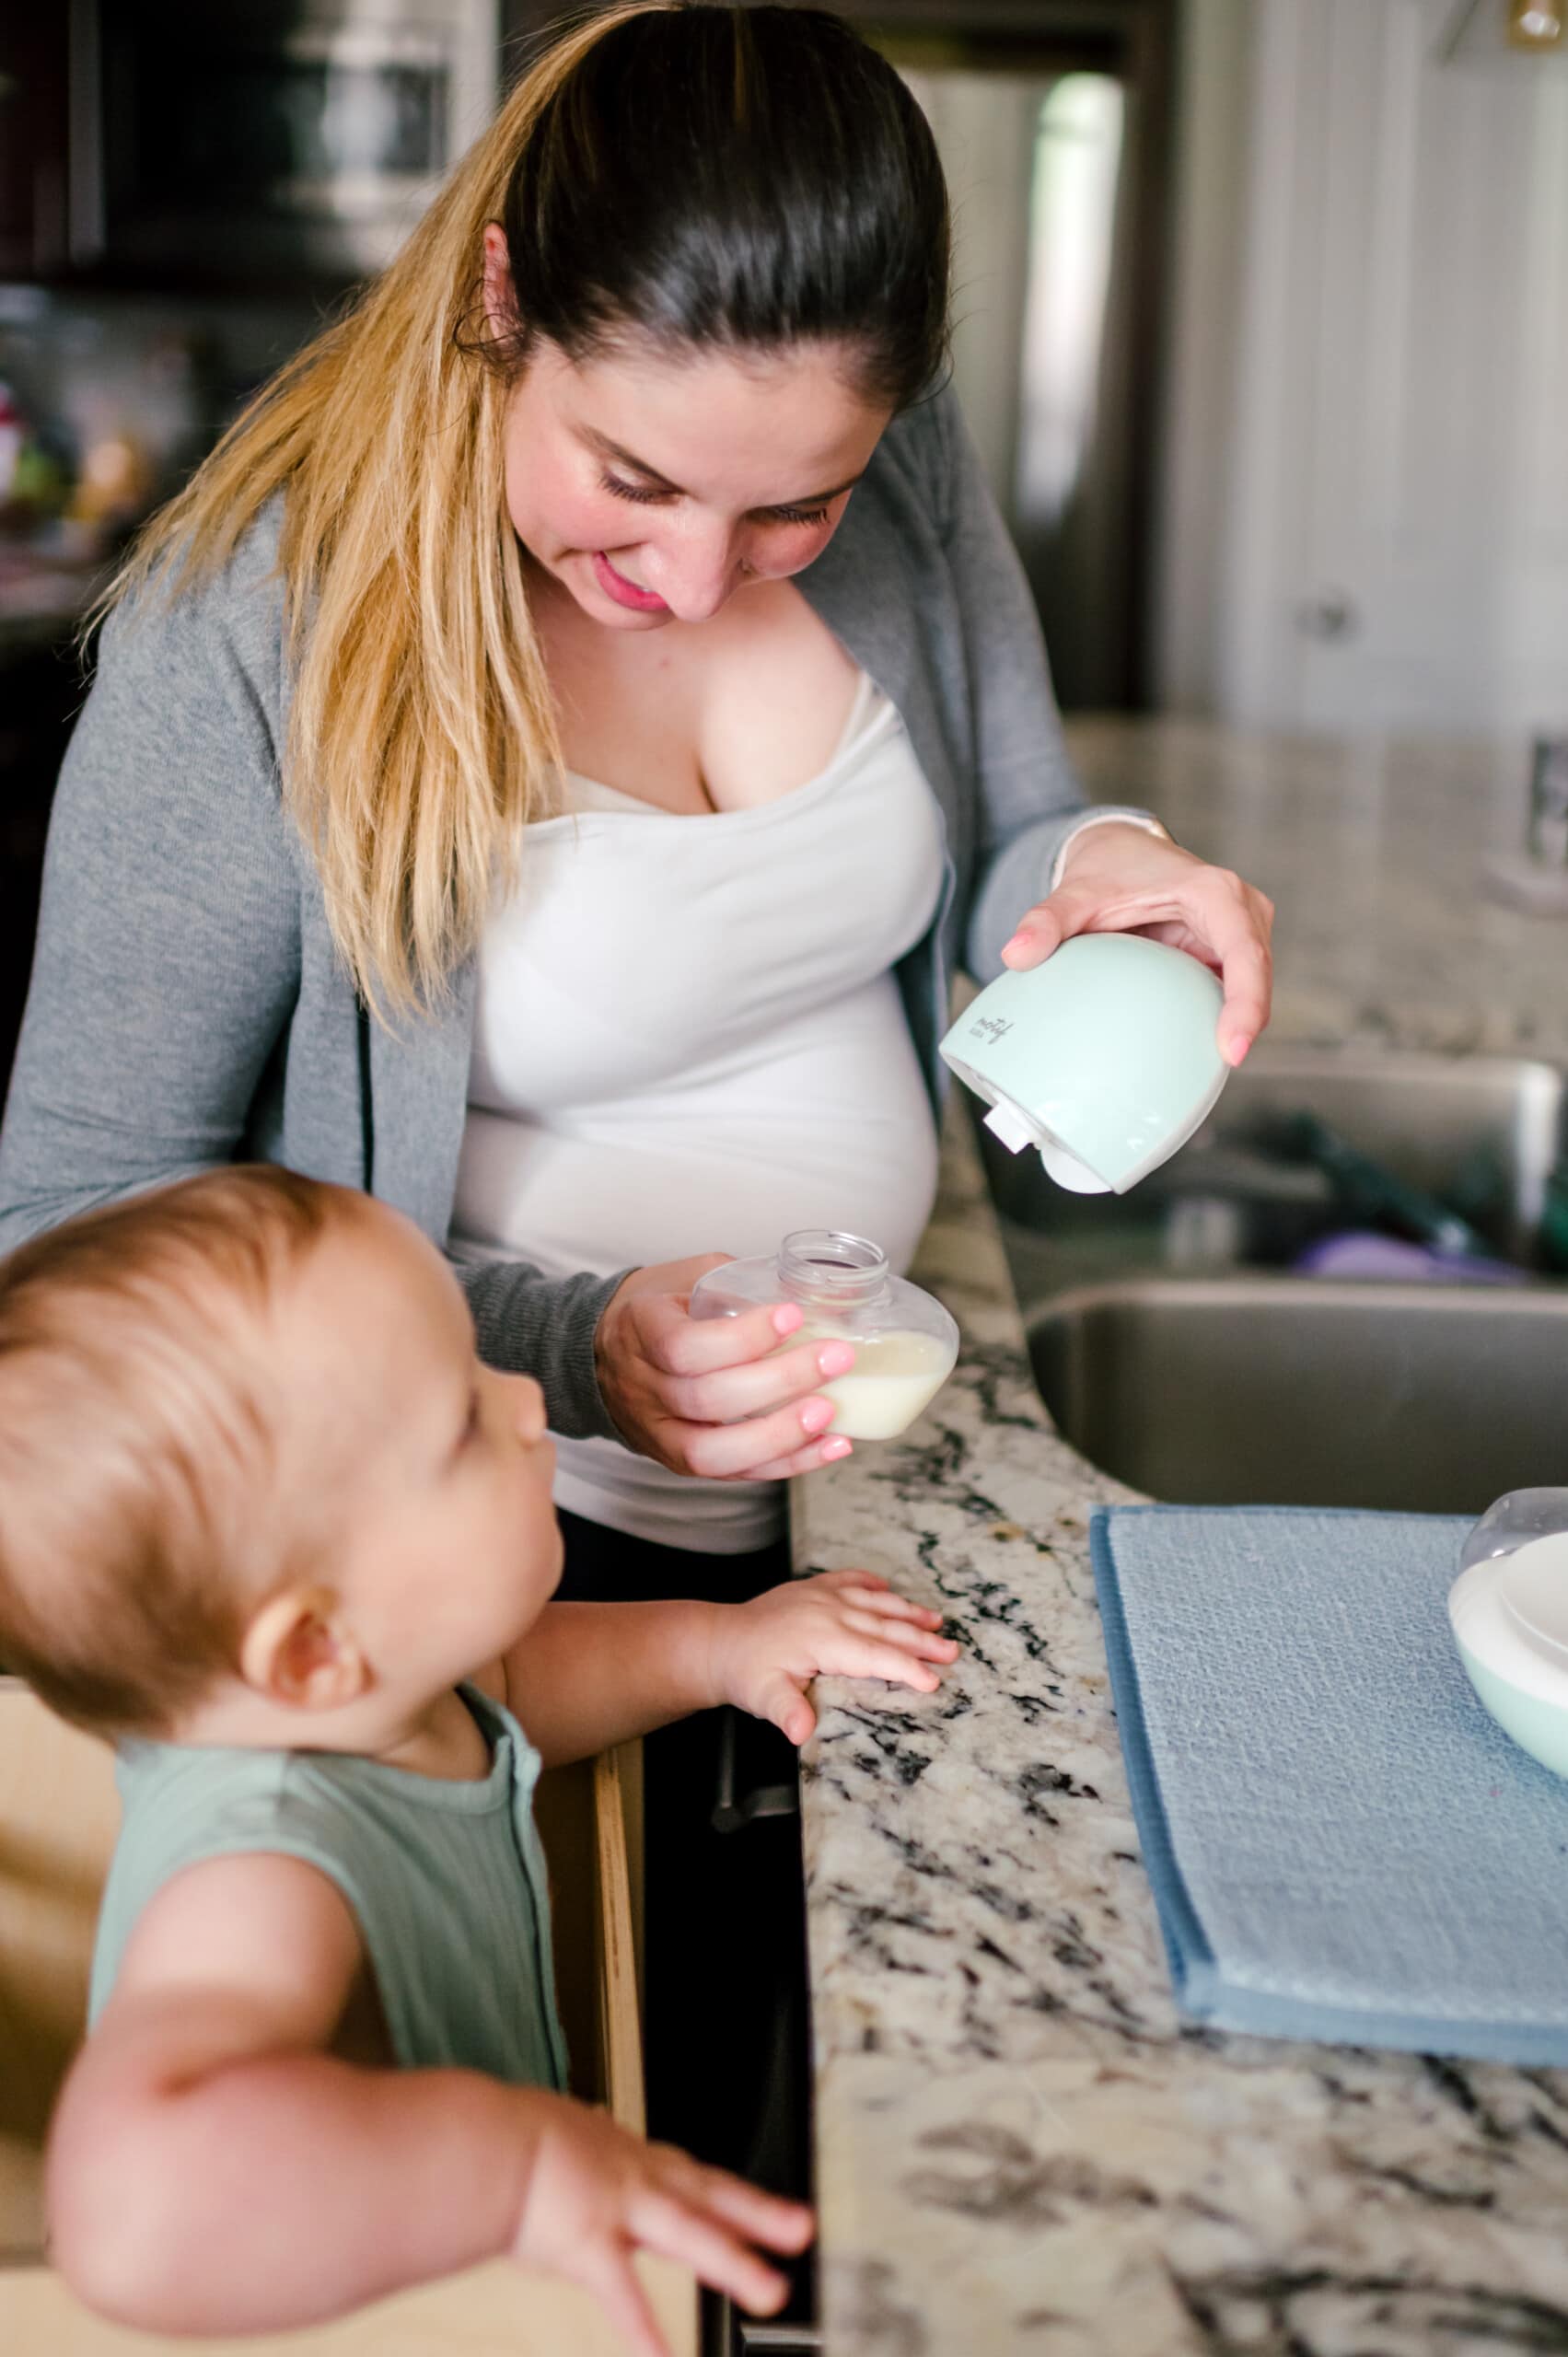 Mom holding the Motif Aura breast pump with milk in it while she is standing in her kitchen with her toddler boy.